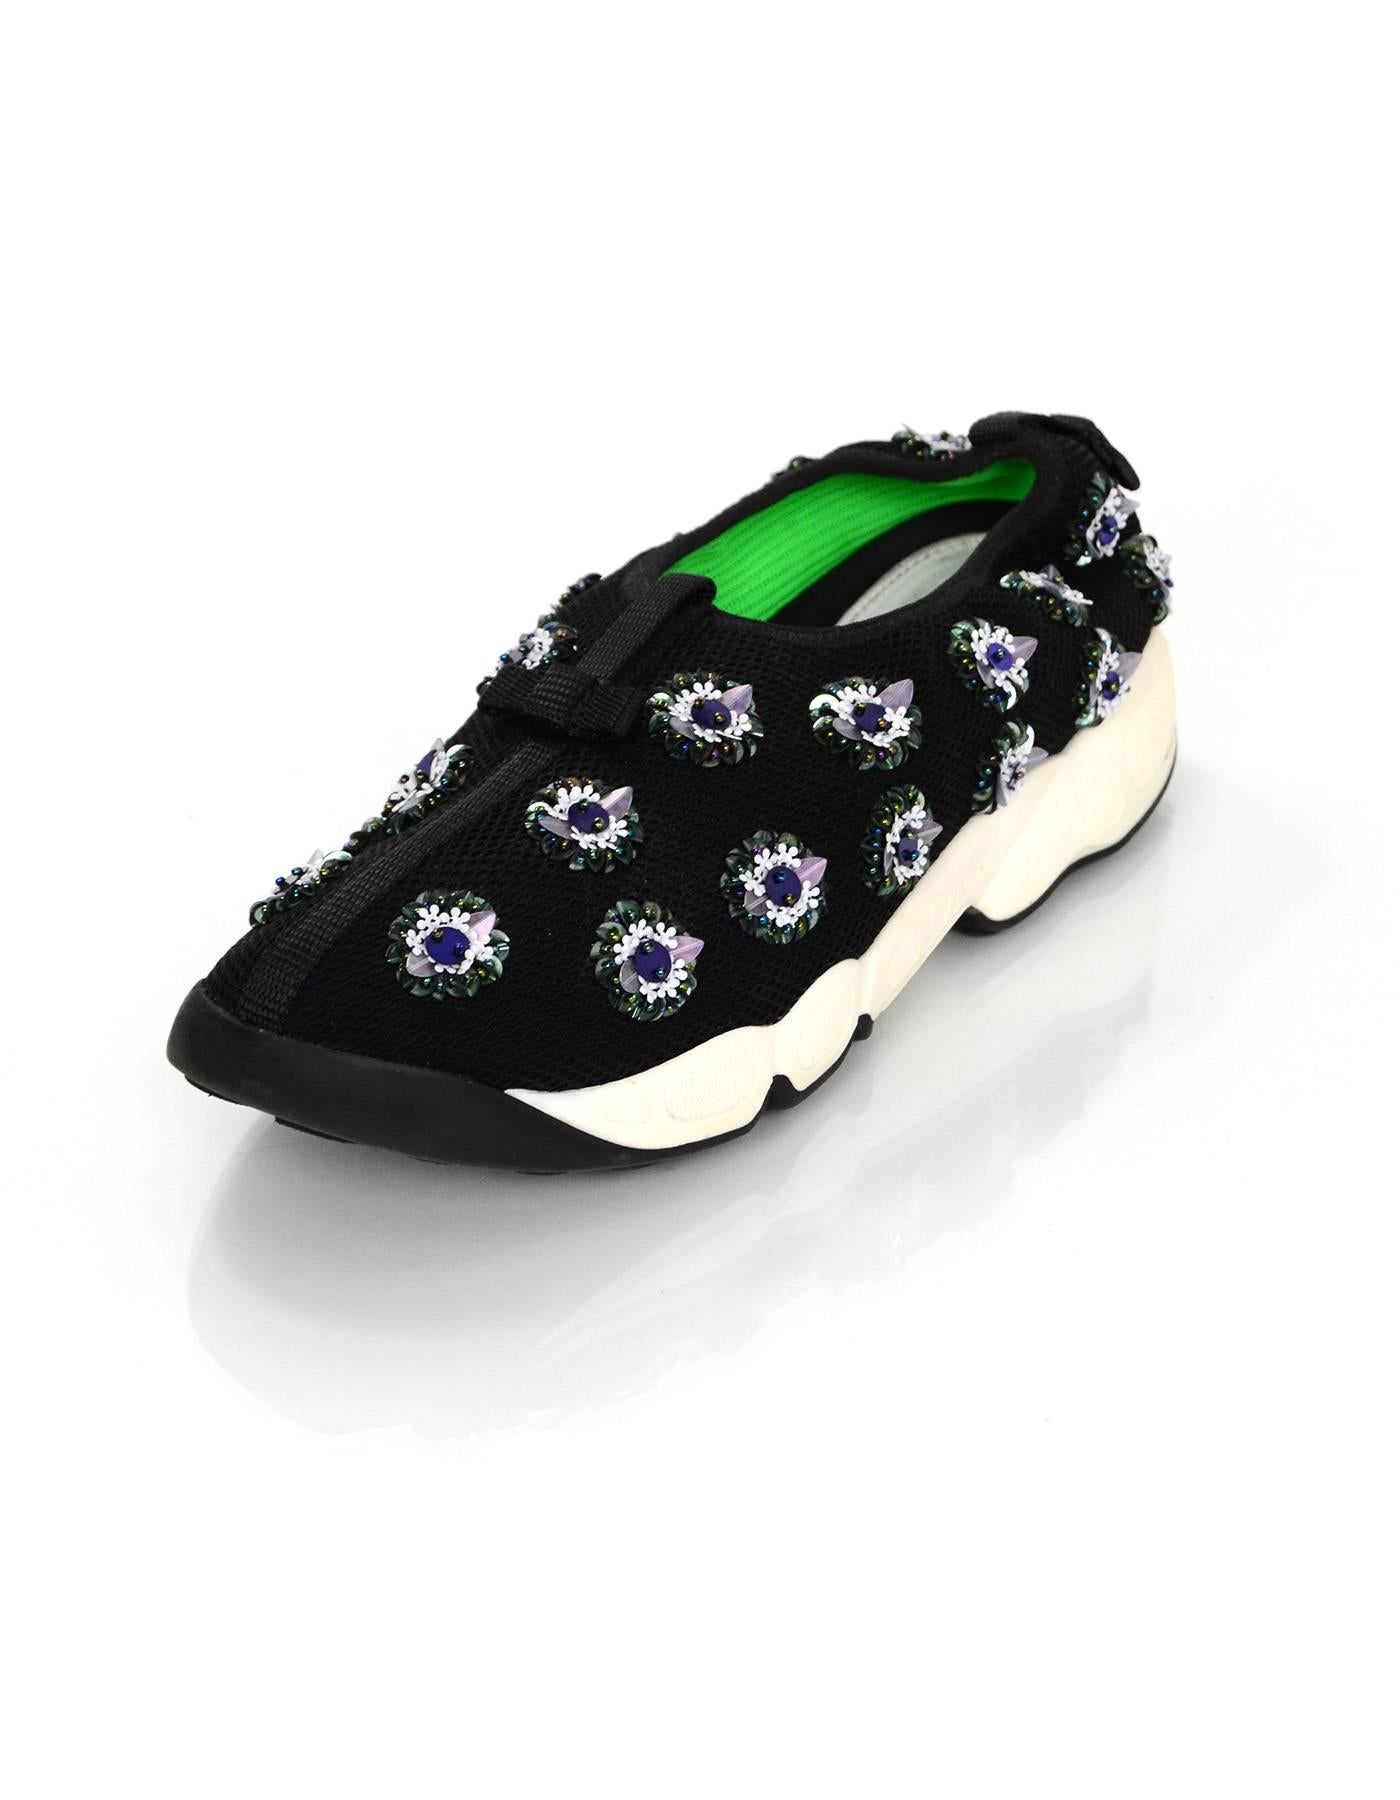 Christian Dior Black and White Floral Beaded Fusion Sneakers Sz 38.5

Features beading throughout

Made In: Italy
Color: Black, white
Materials: Nylon/mesh blend, beads, rubber
Closure/Opening: Slide on
Sole Stamp: Dior Made in Italy 38.5
Overall